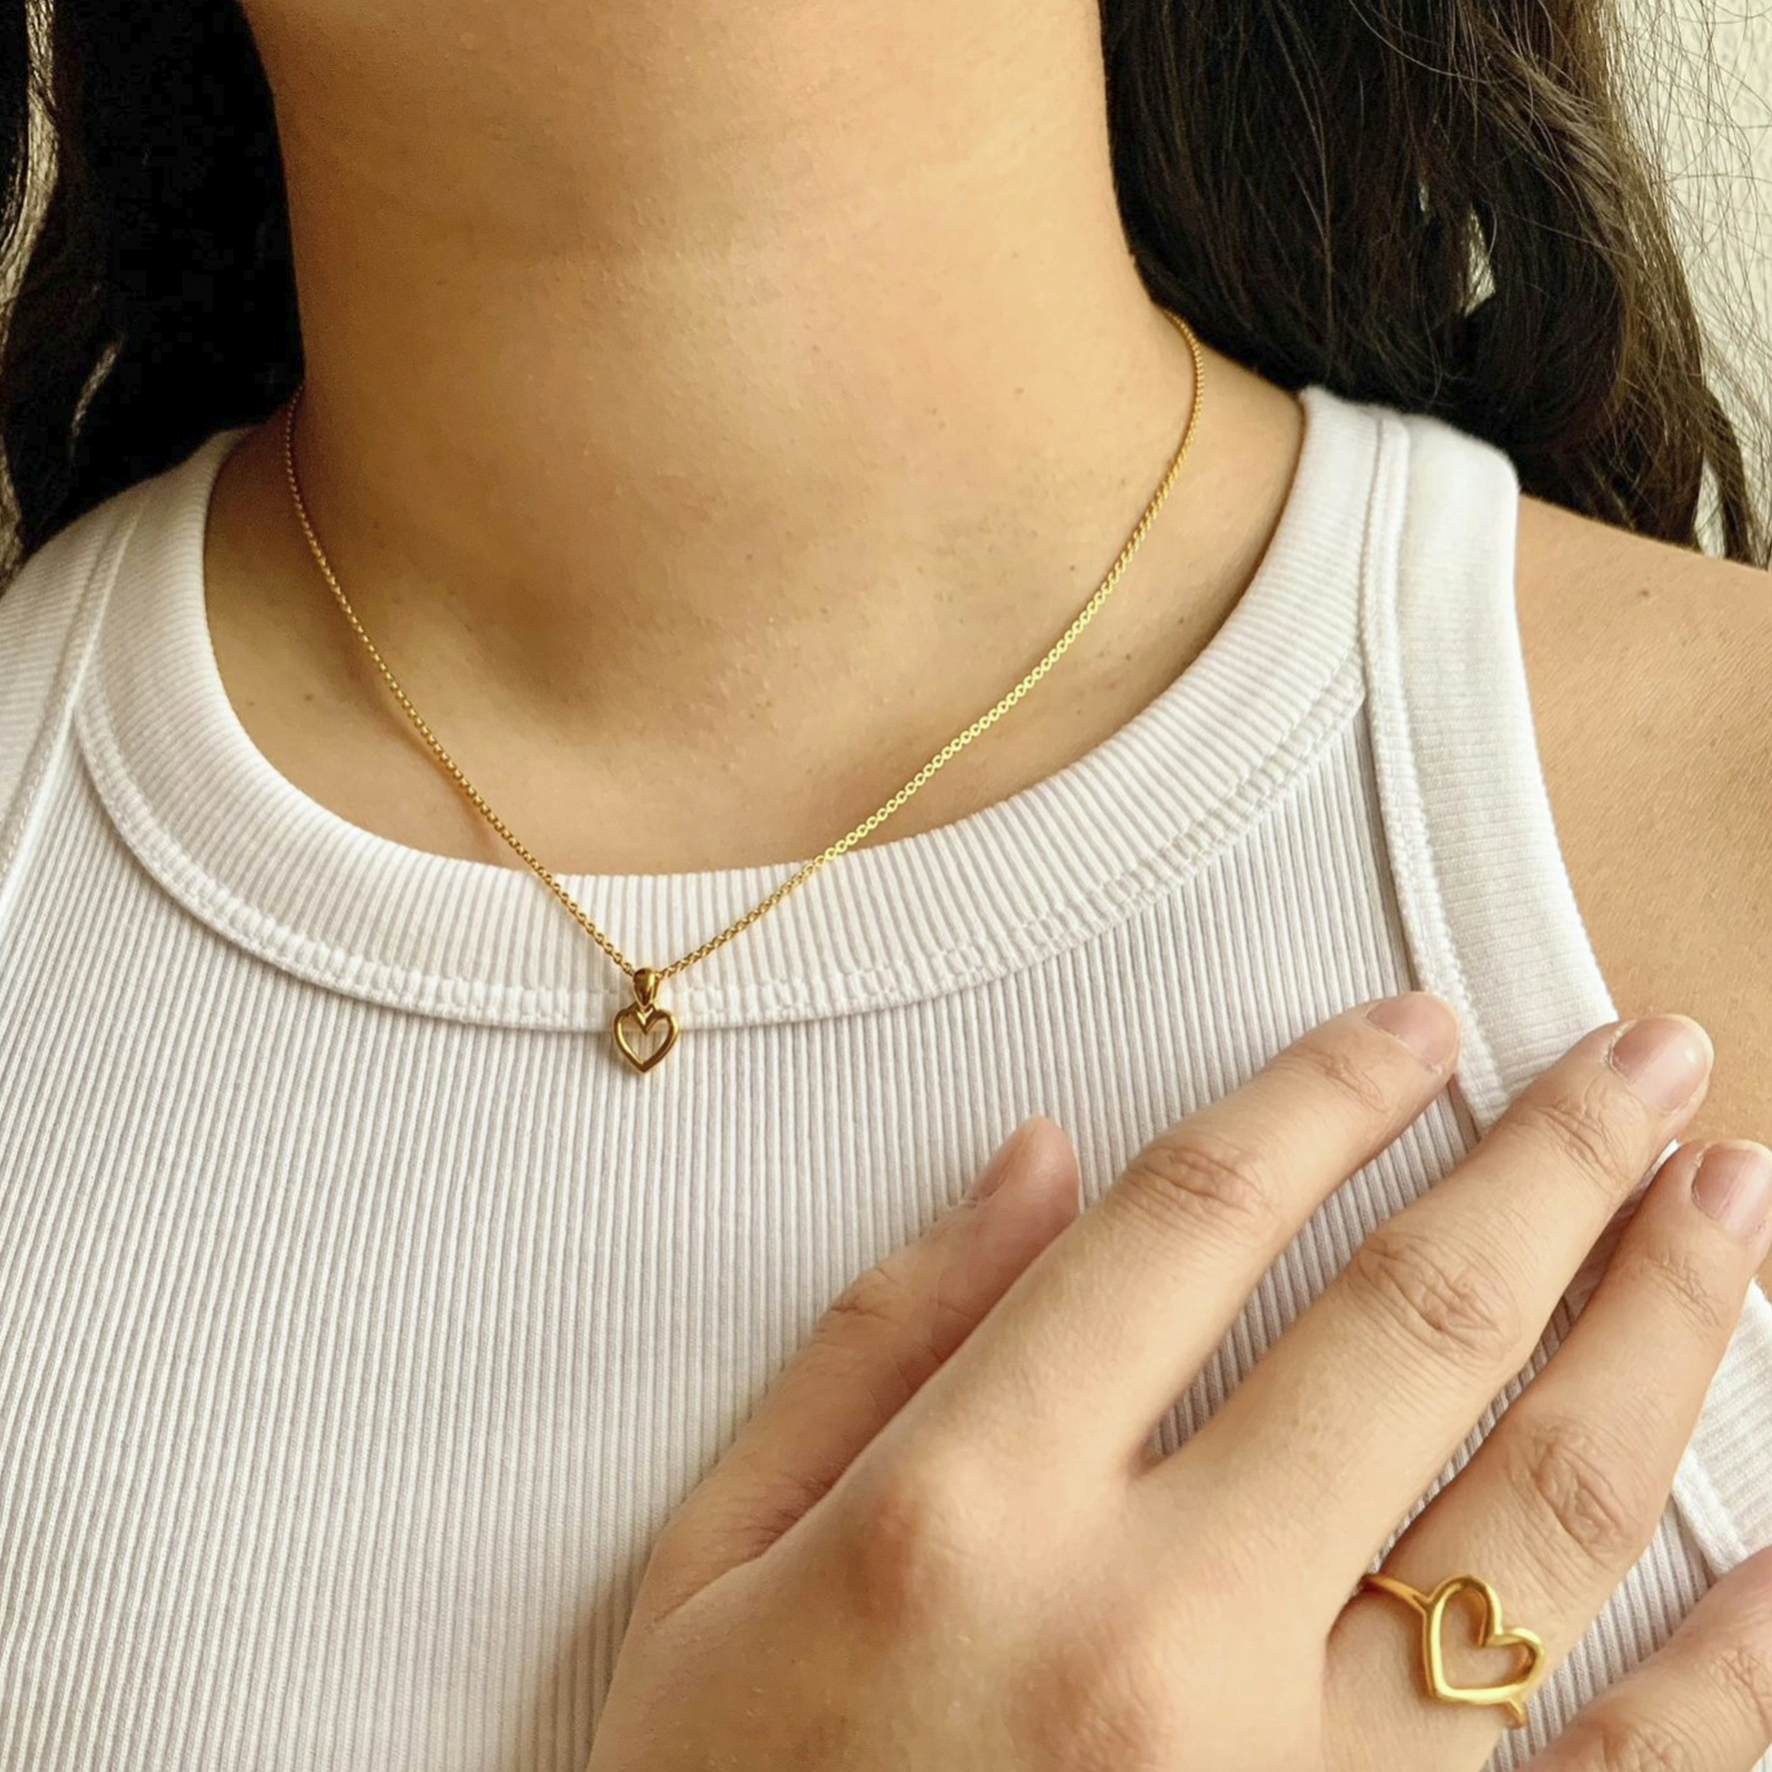 Ringlet Mentor dør spejl Beautiful Love Charity Necklace from Izabel Camille in Goldplated-Silver  Sterling 925